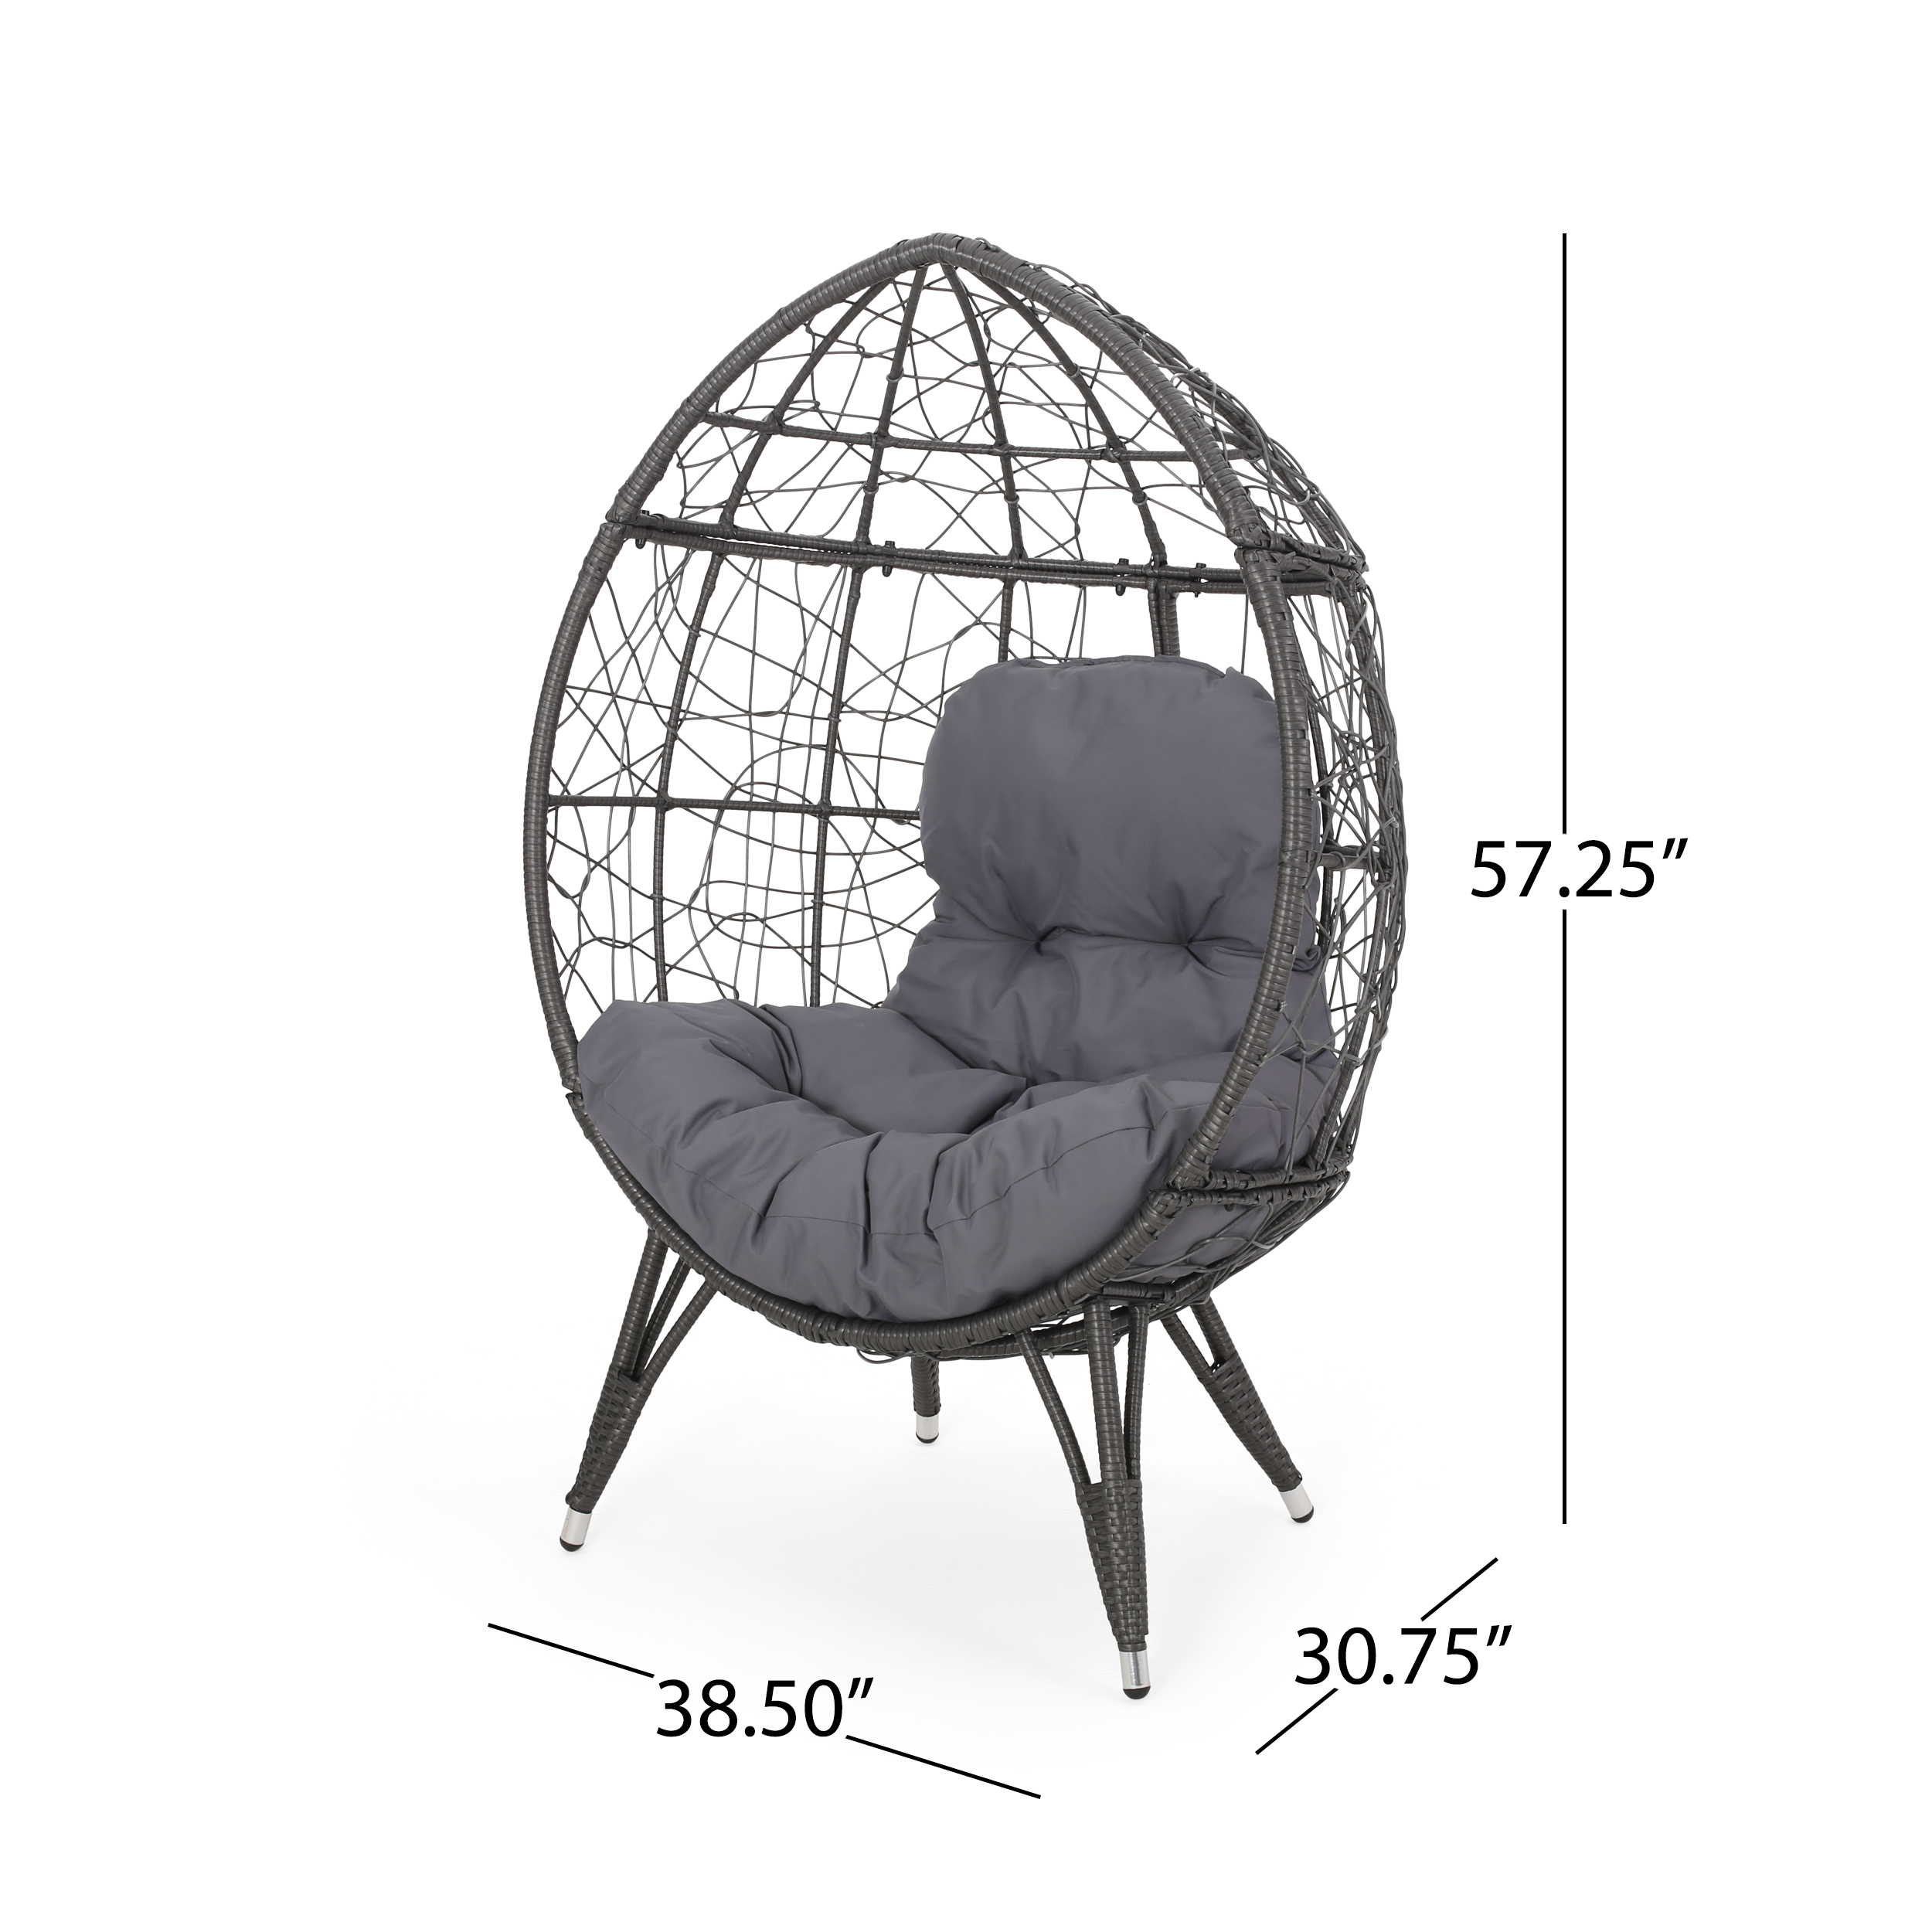 Keondre Indoor Wicker Teardrop Chair with Cushion, Gray and Dark Gray - image 5 of 11